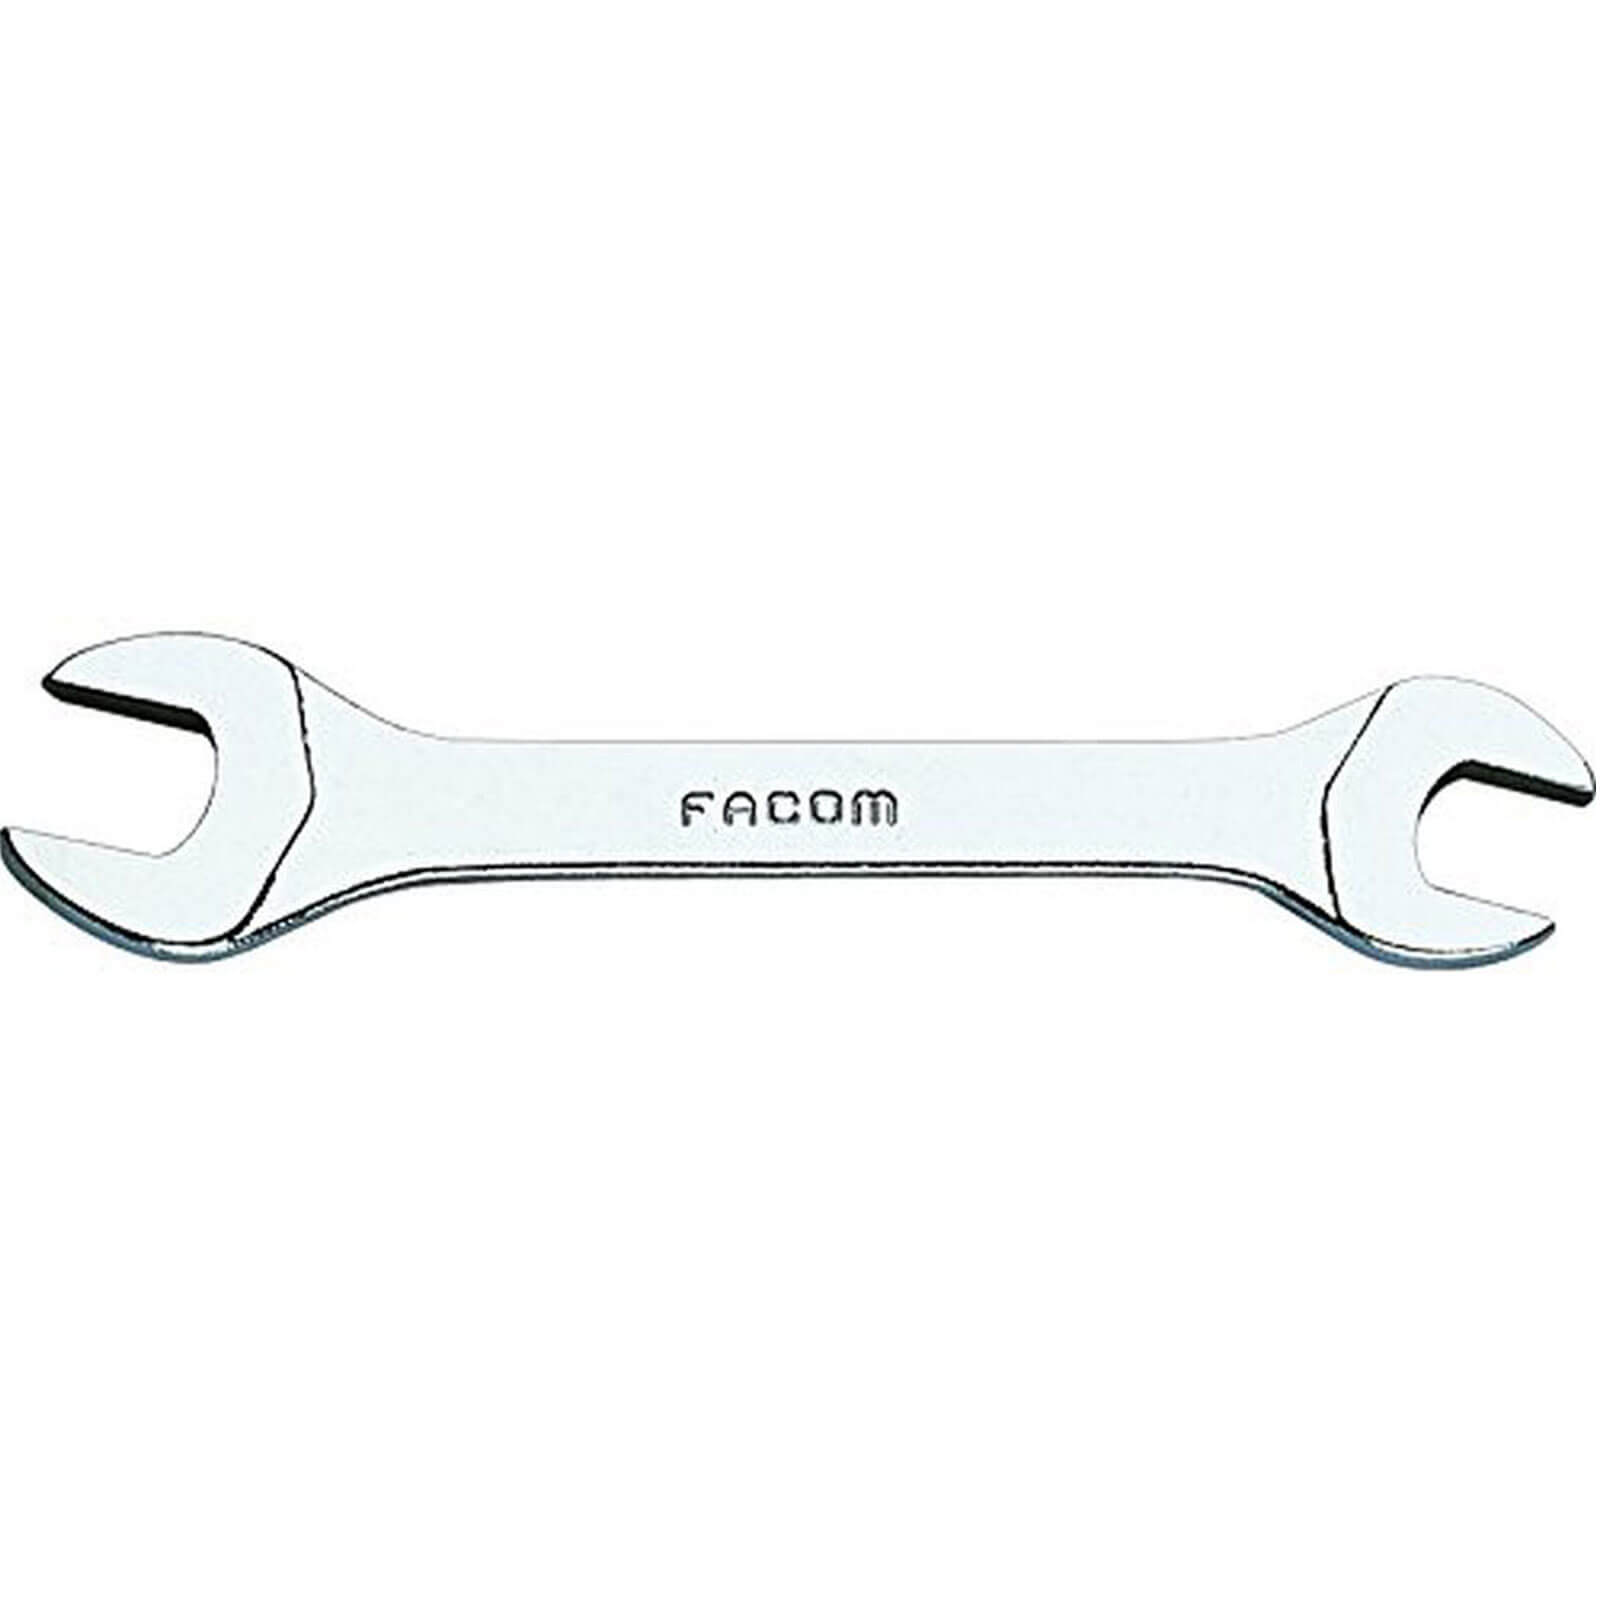 Image of Facom Miniature Open End Spanner Metric 3.2mm x 5.5mm